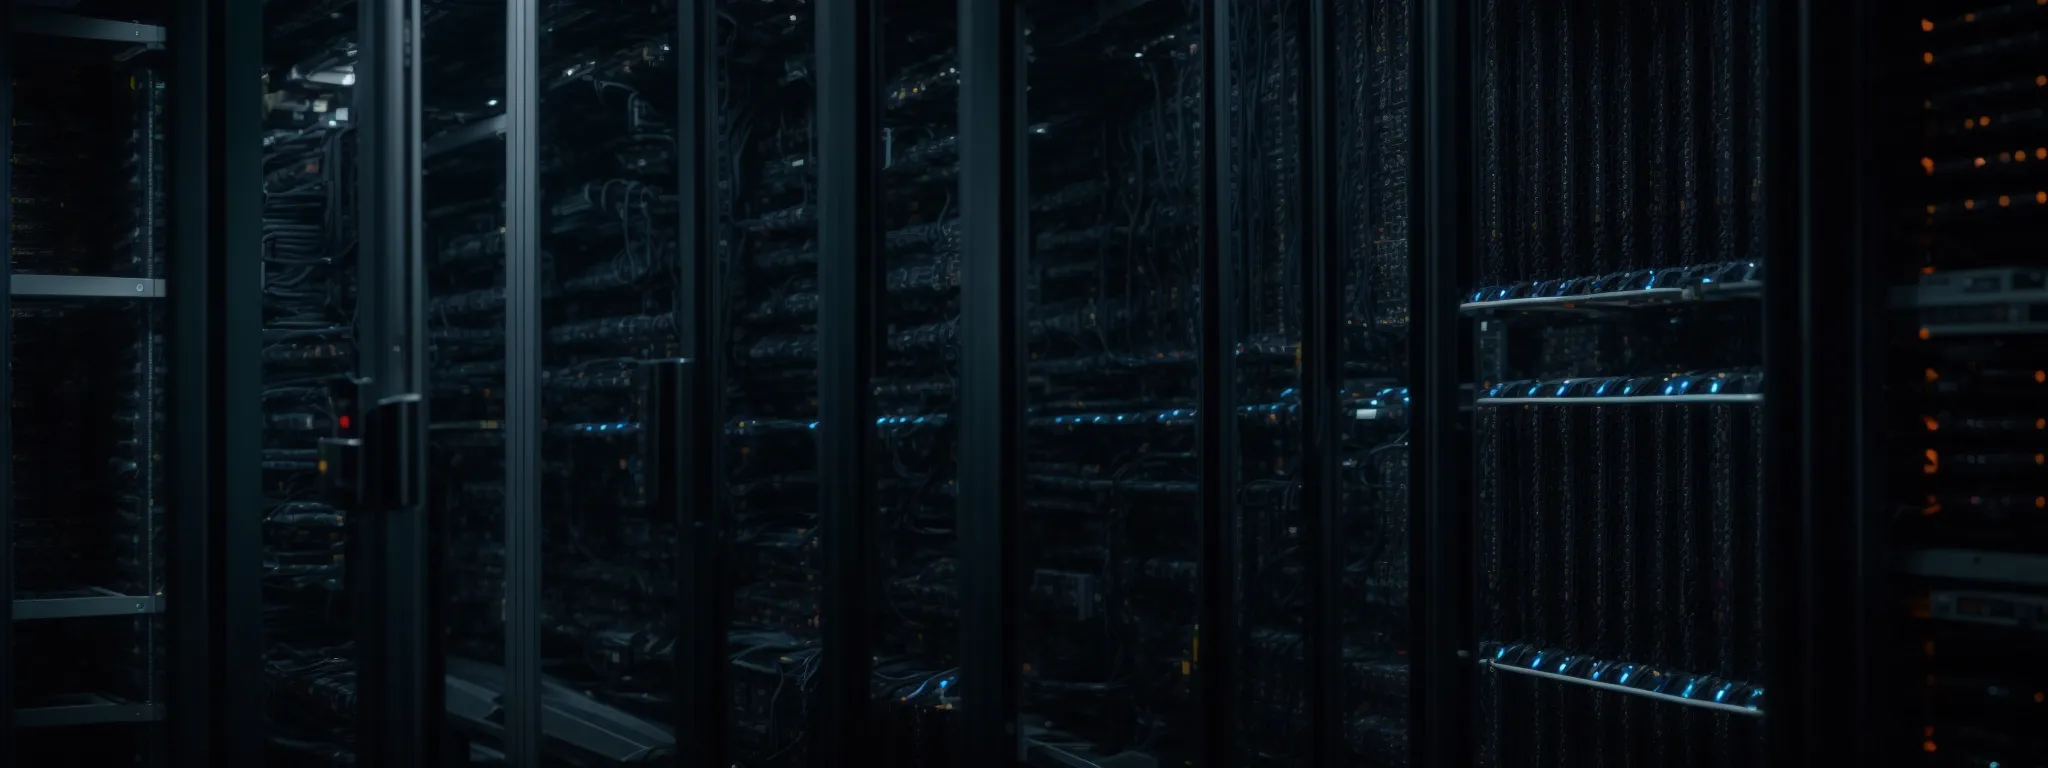 rows of server racks in a dimly lit data center with cables running between them.